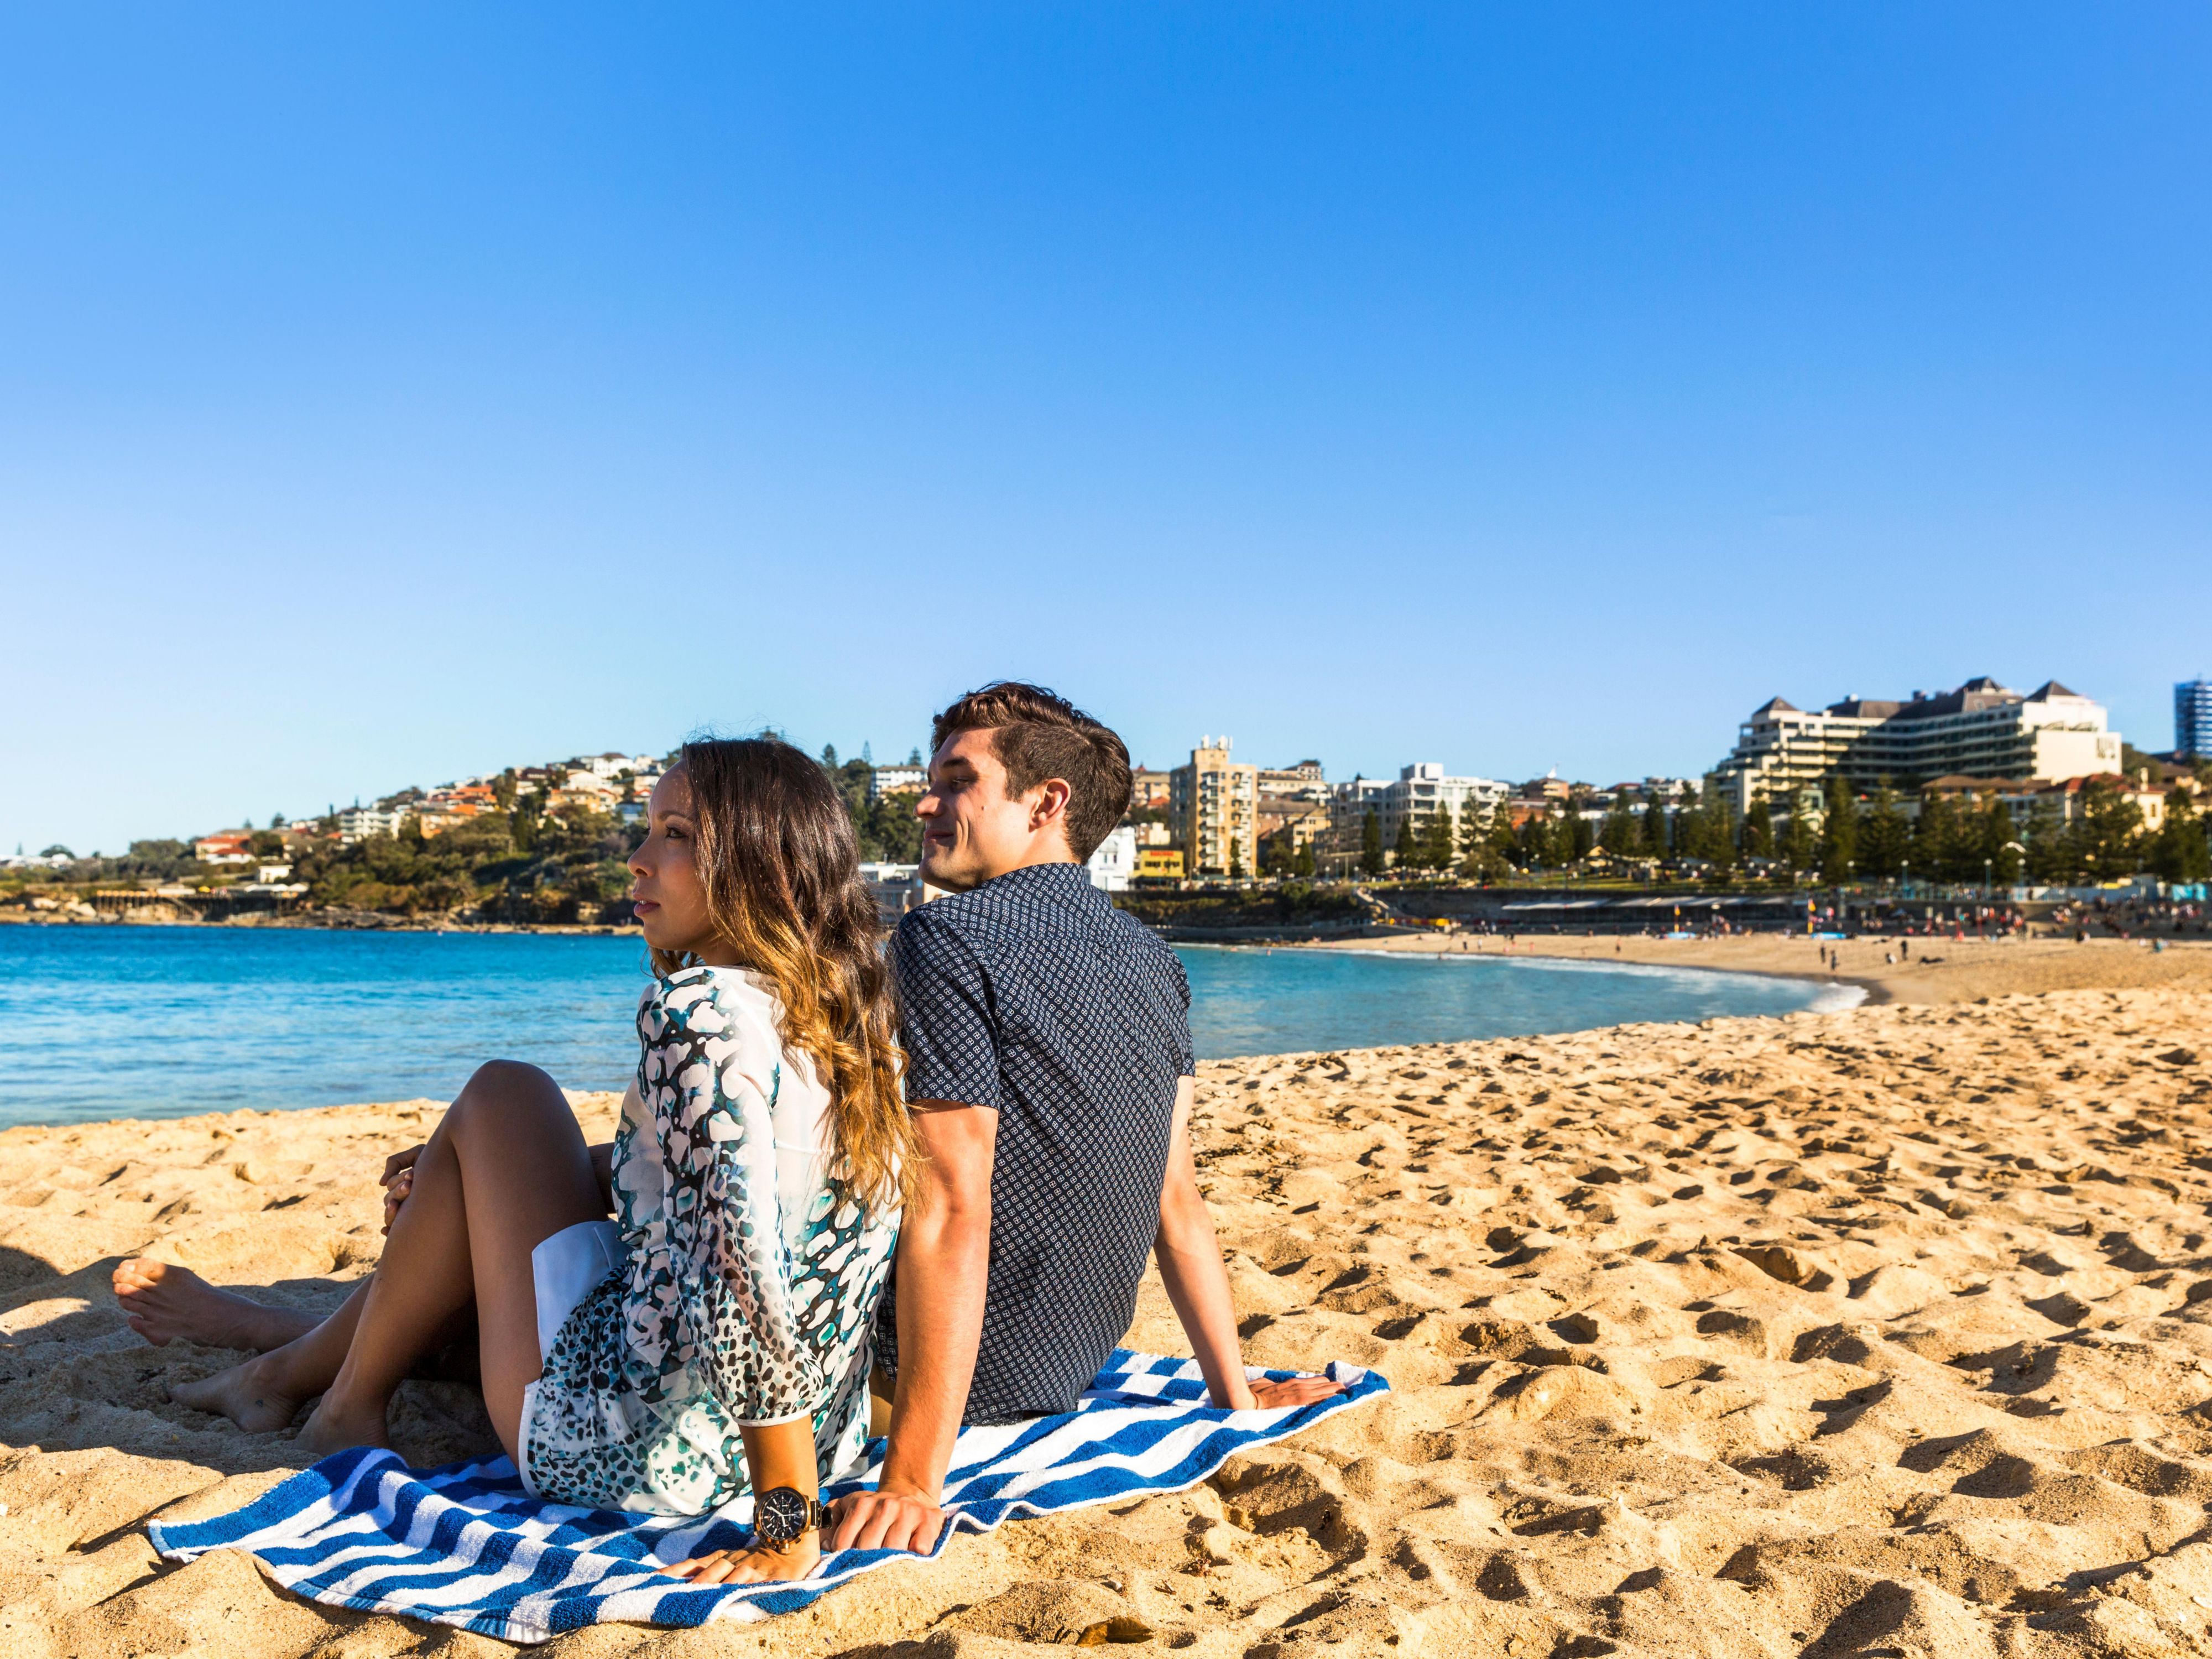 Explore beautiful Coogee Beach located directly opposite the hotel. Relax on the sand, enjoy a swim or surf or take a walk along the famous Coogee to Bondi Coastal Walk. 